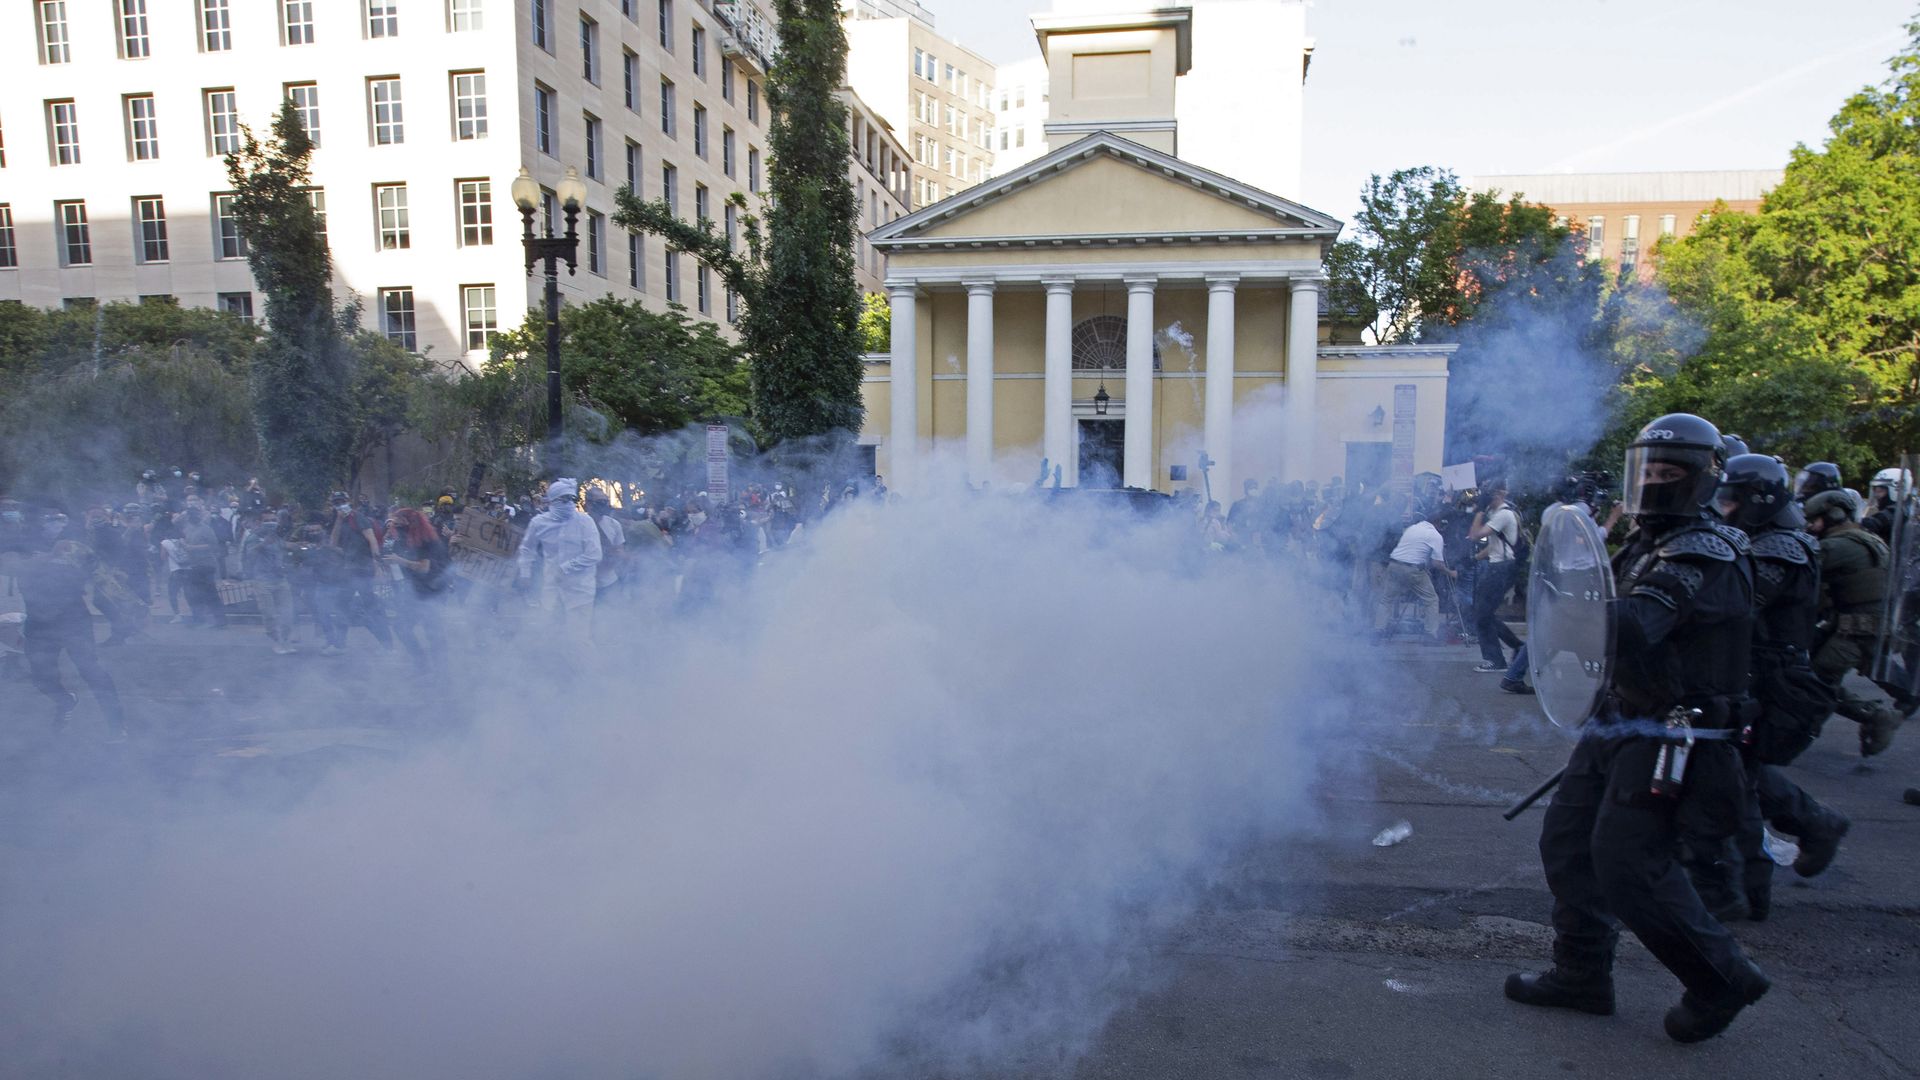 Police and security officers use tear gas to disperse protestors in front of St. Johns